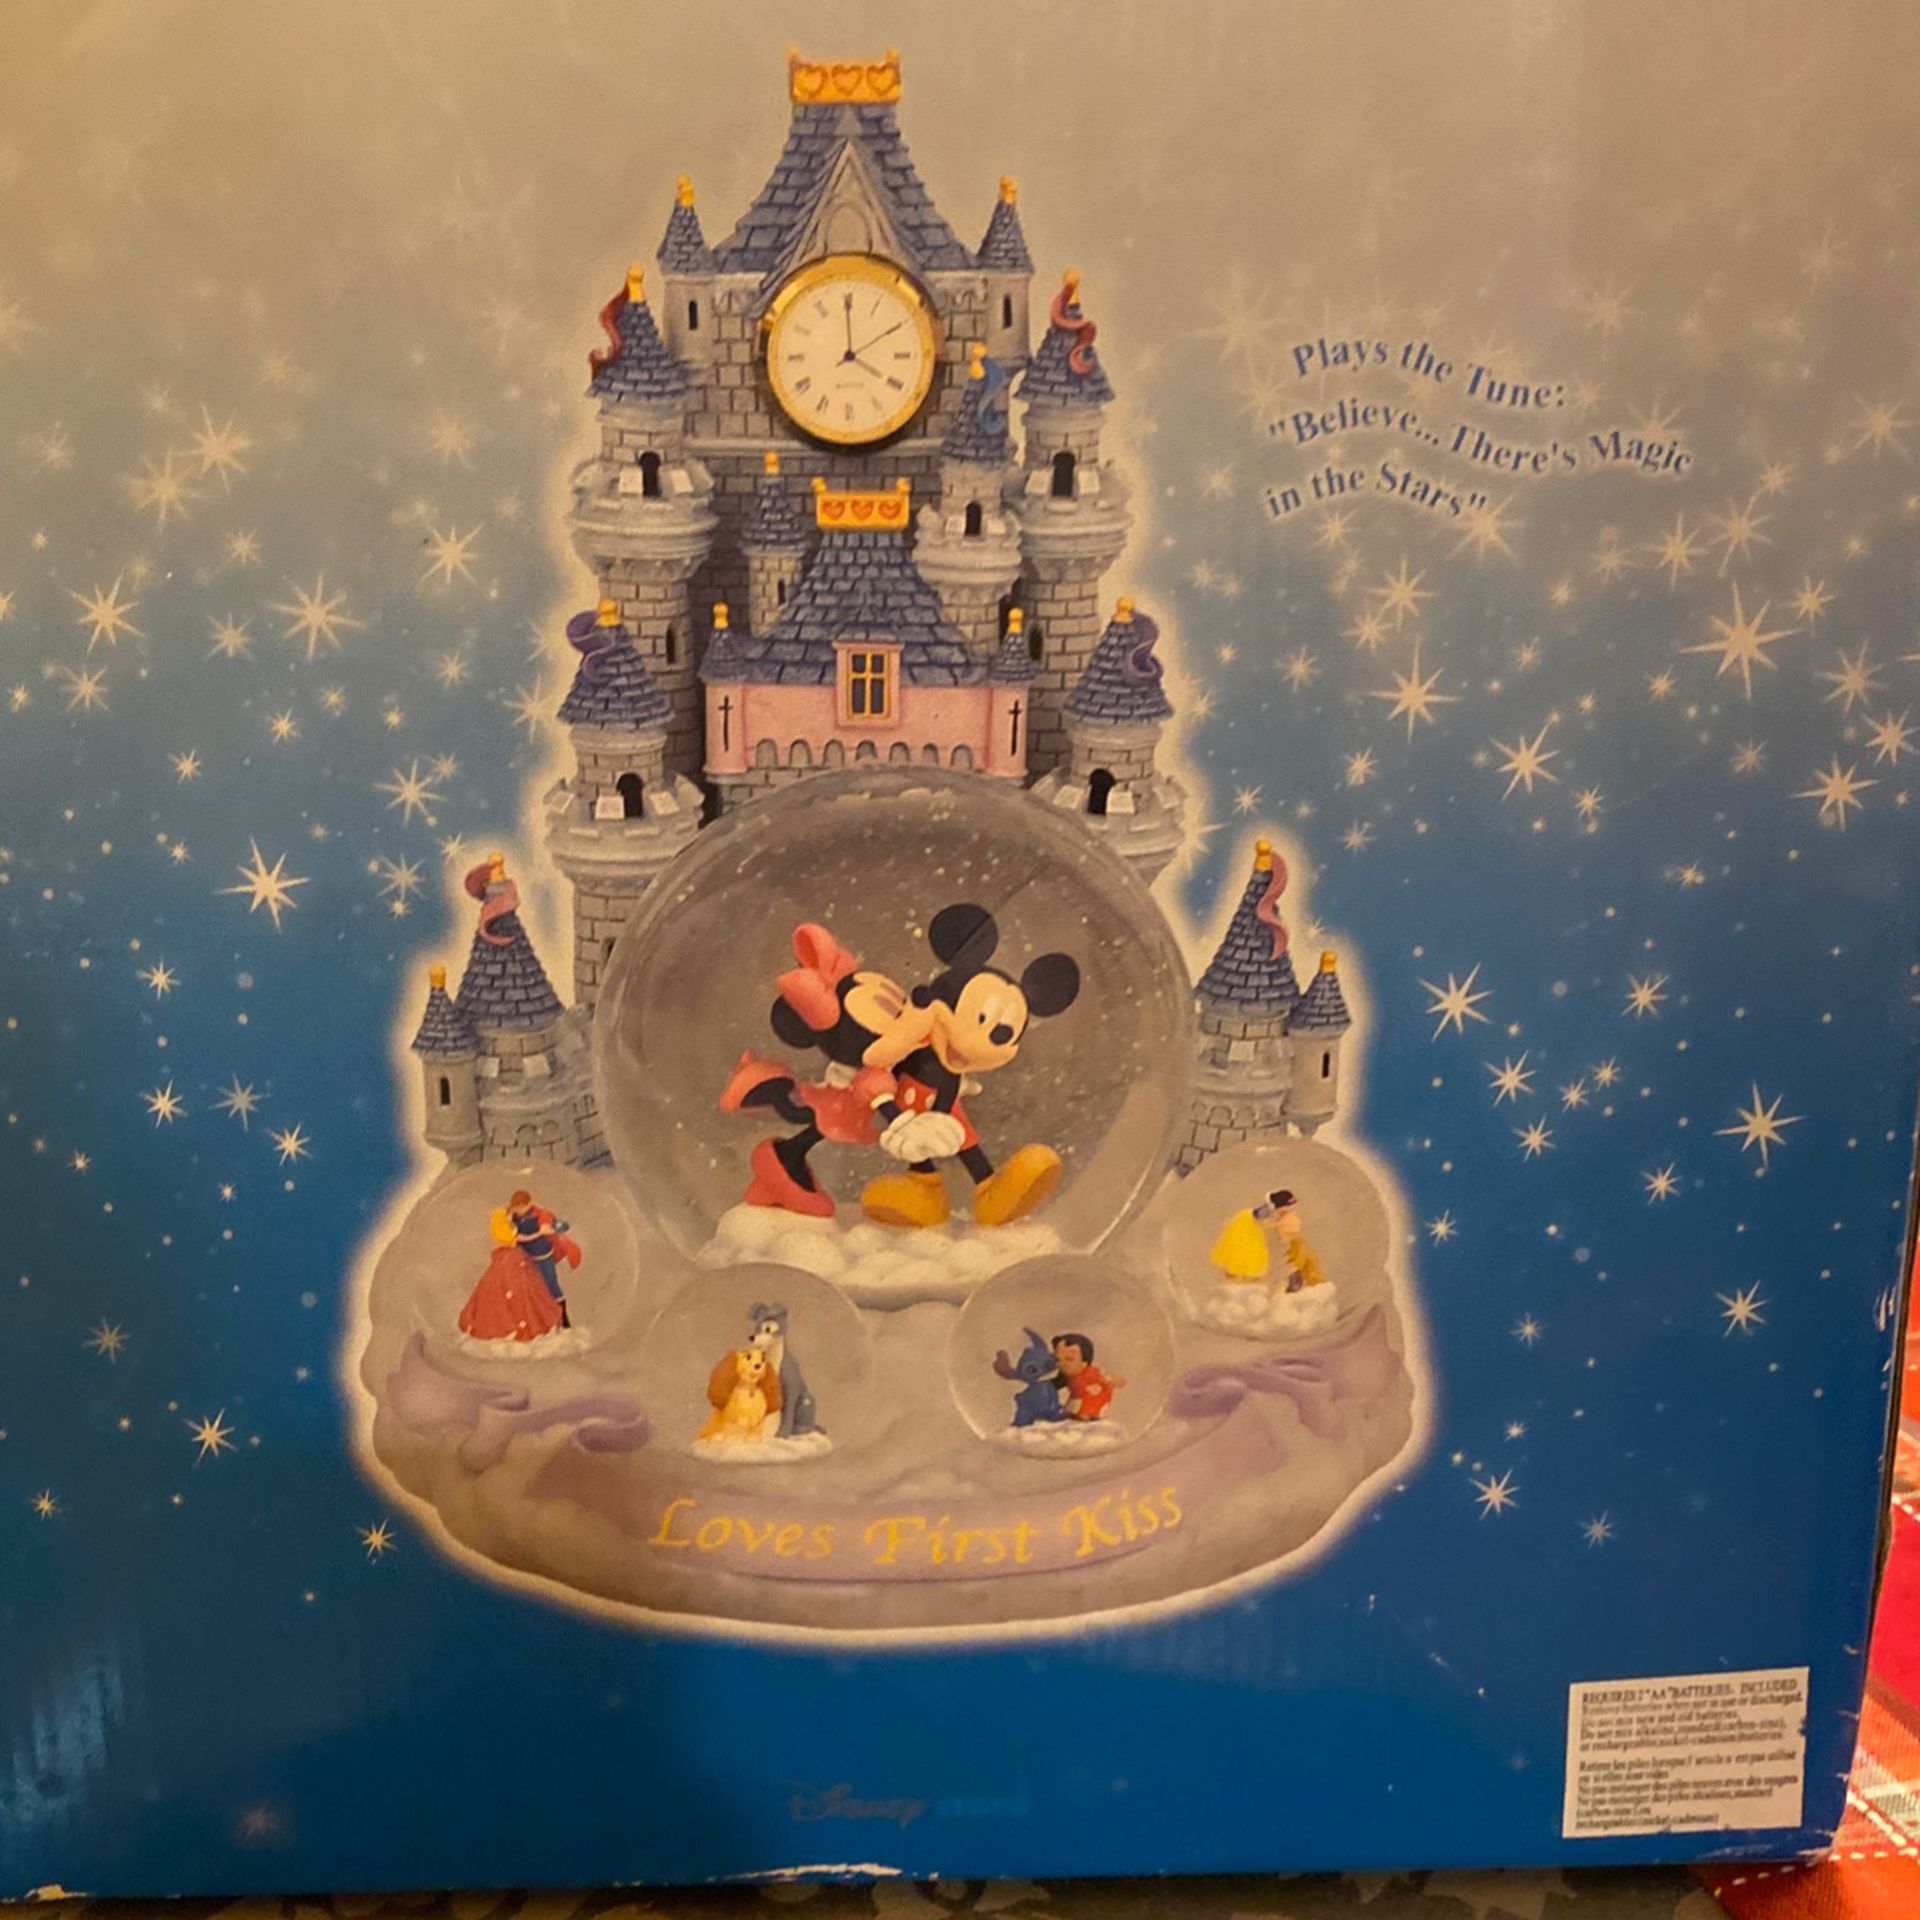 Disney Collectible - Loves First Kiss